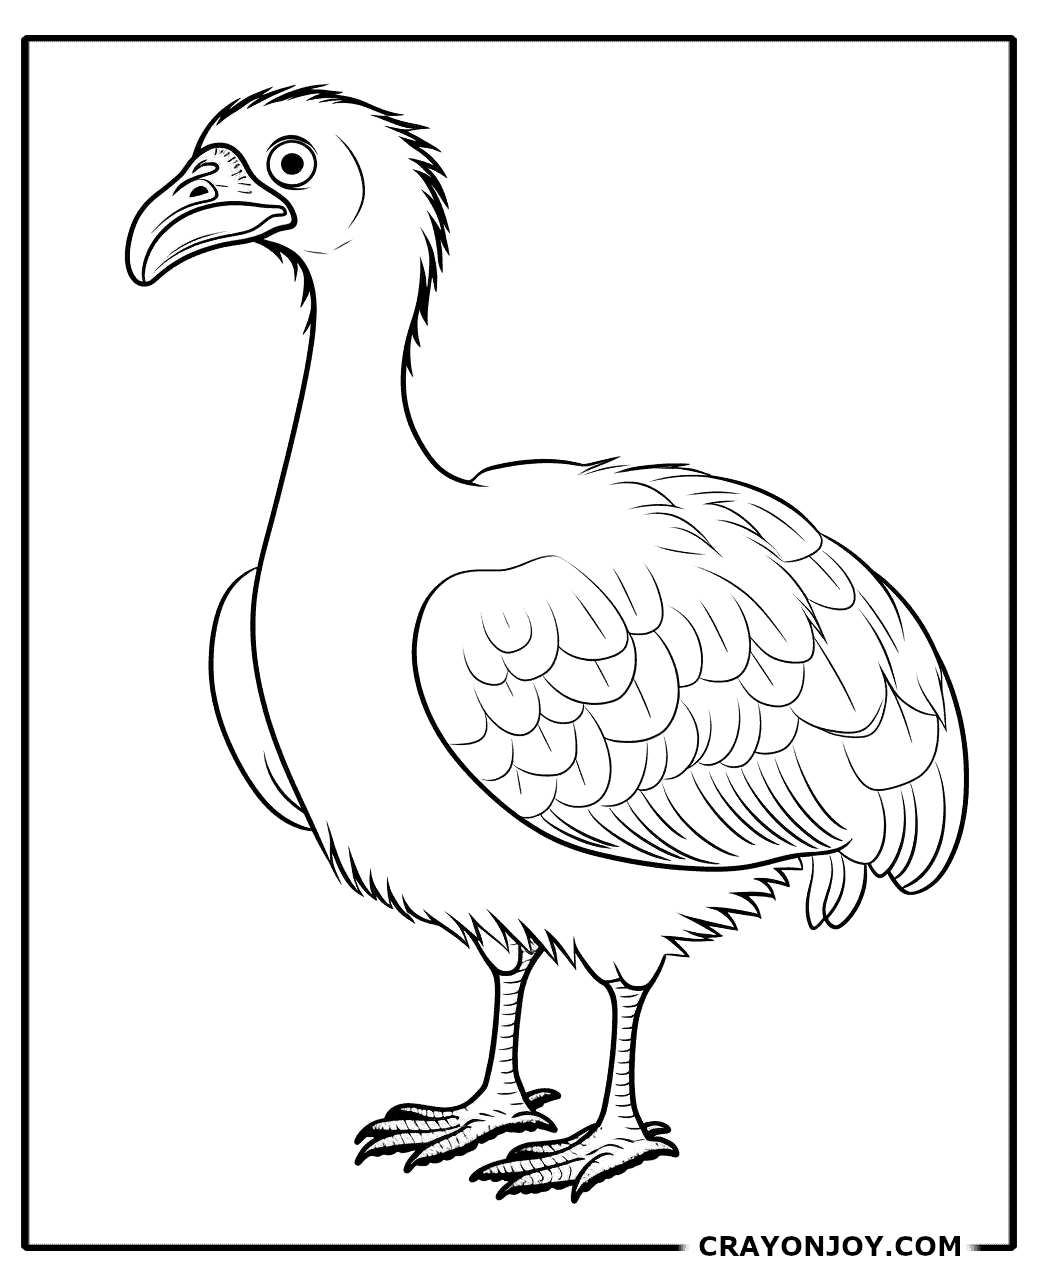 Dodo-Bird Coloring Pages: Free Printable Sheets for Kids